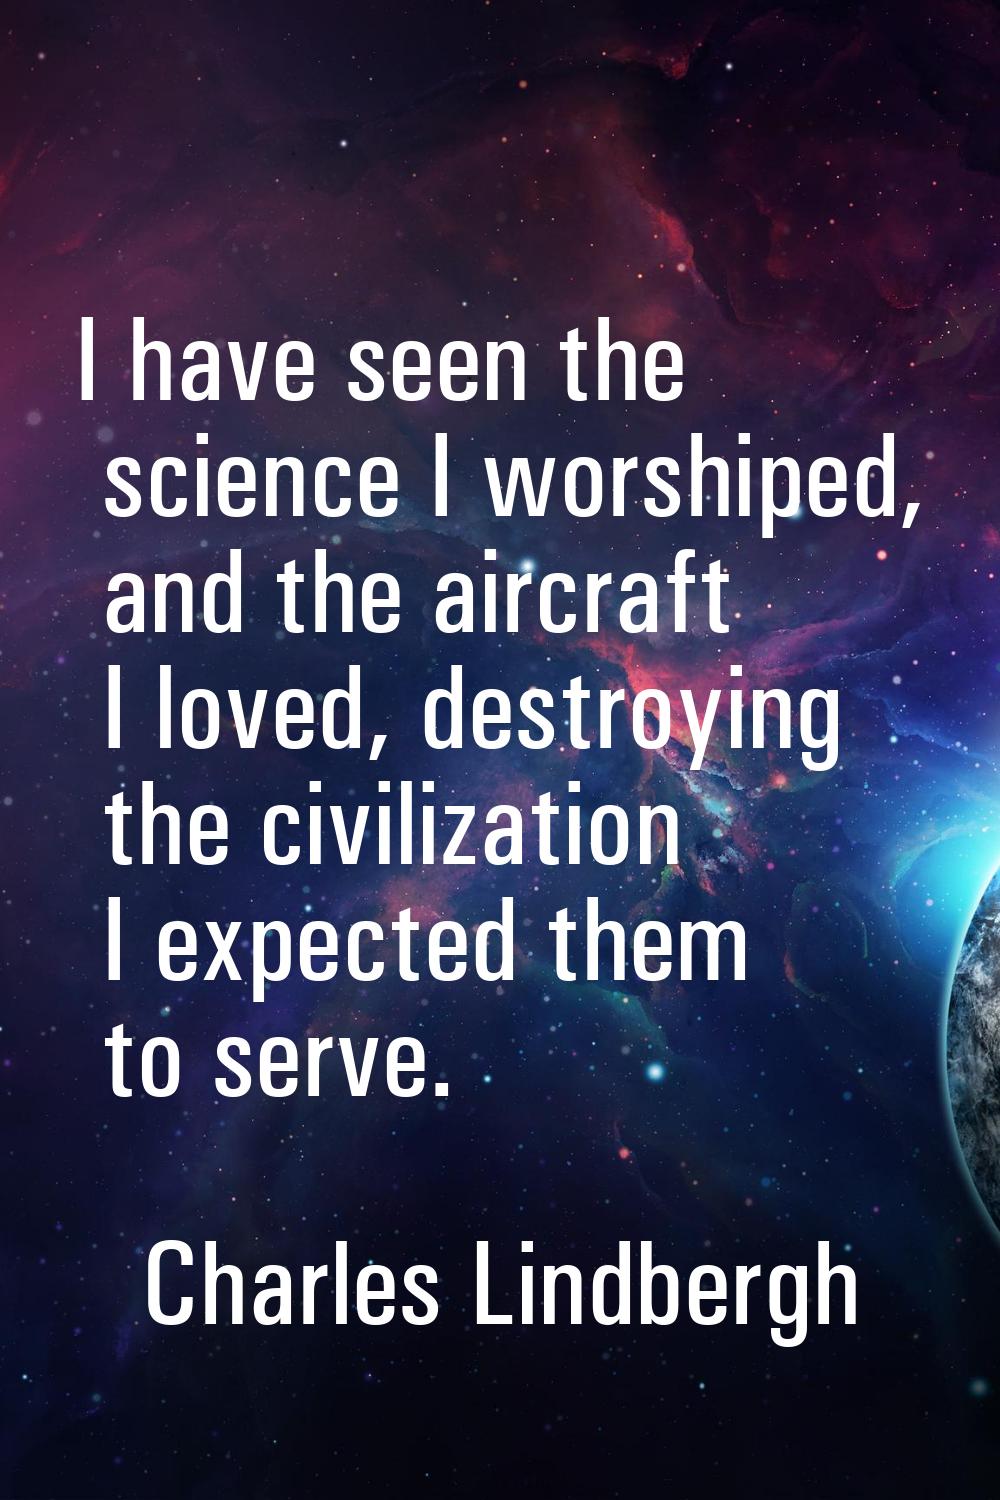 I have seen the science I worshiped, and the aircraft I loved, destroying the civilization I expect